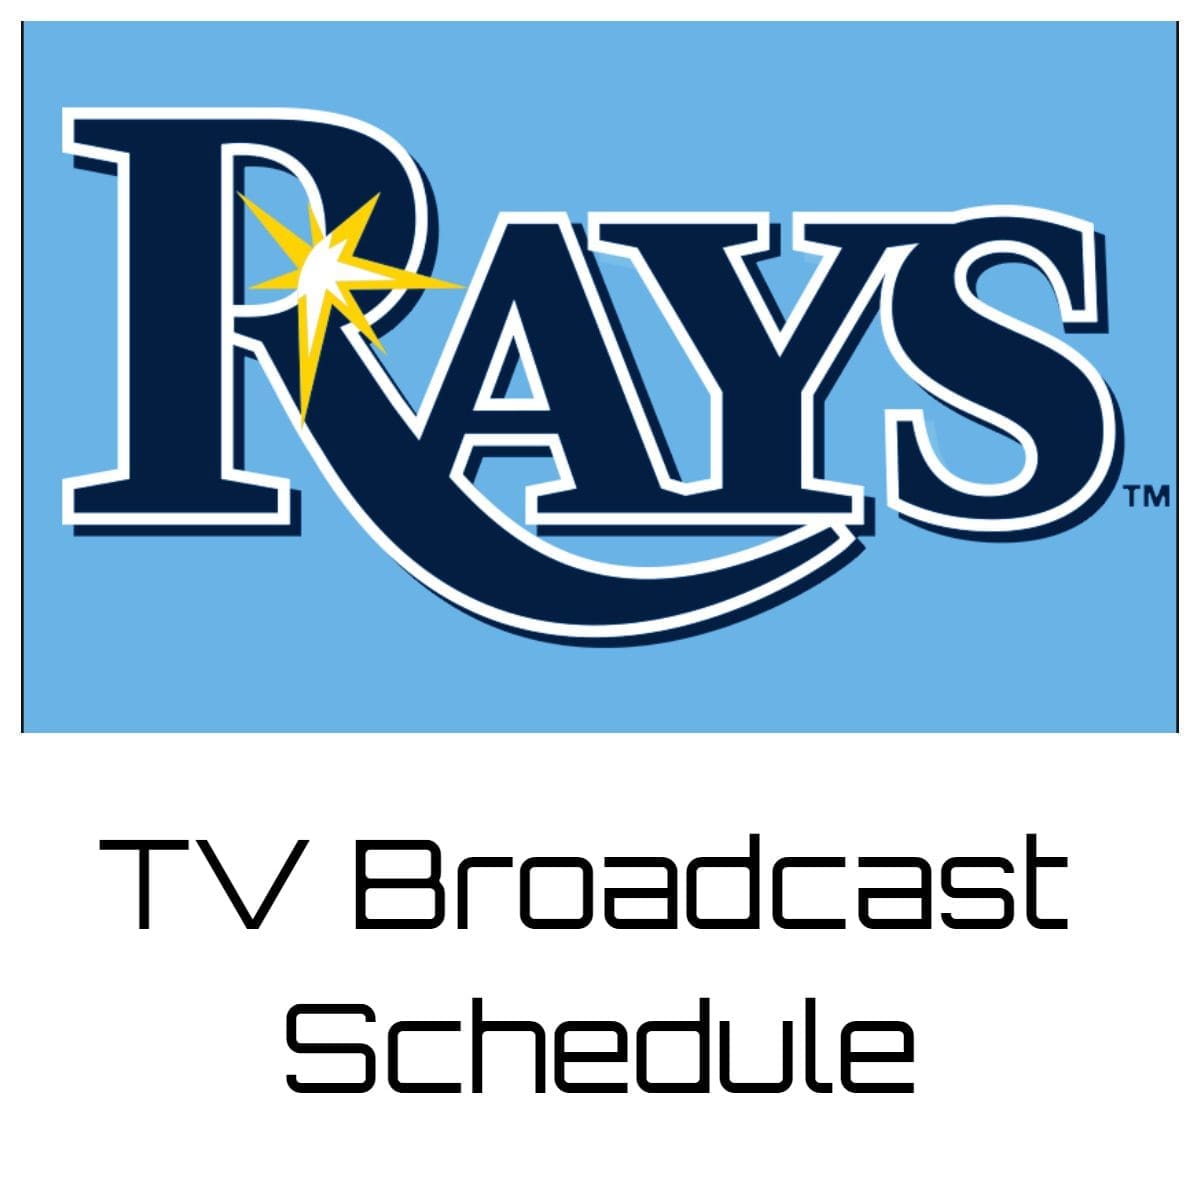 Bally Sports Sun to broadcast 156 Tampa Bay Rays games in 2023